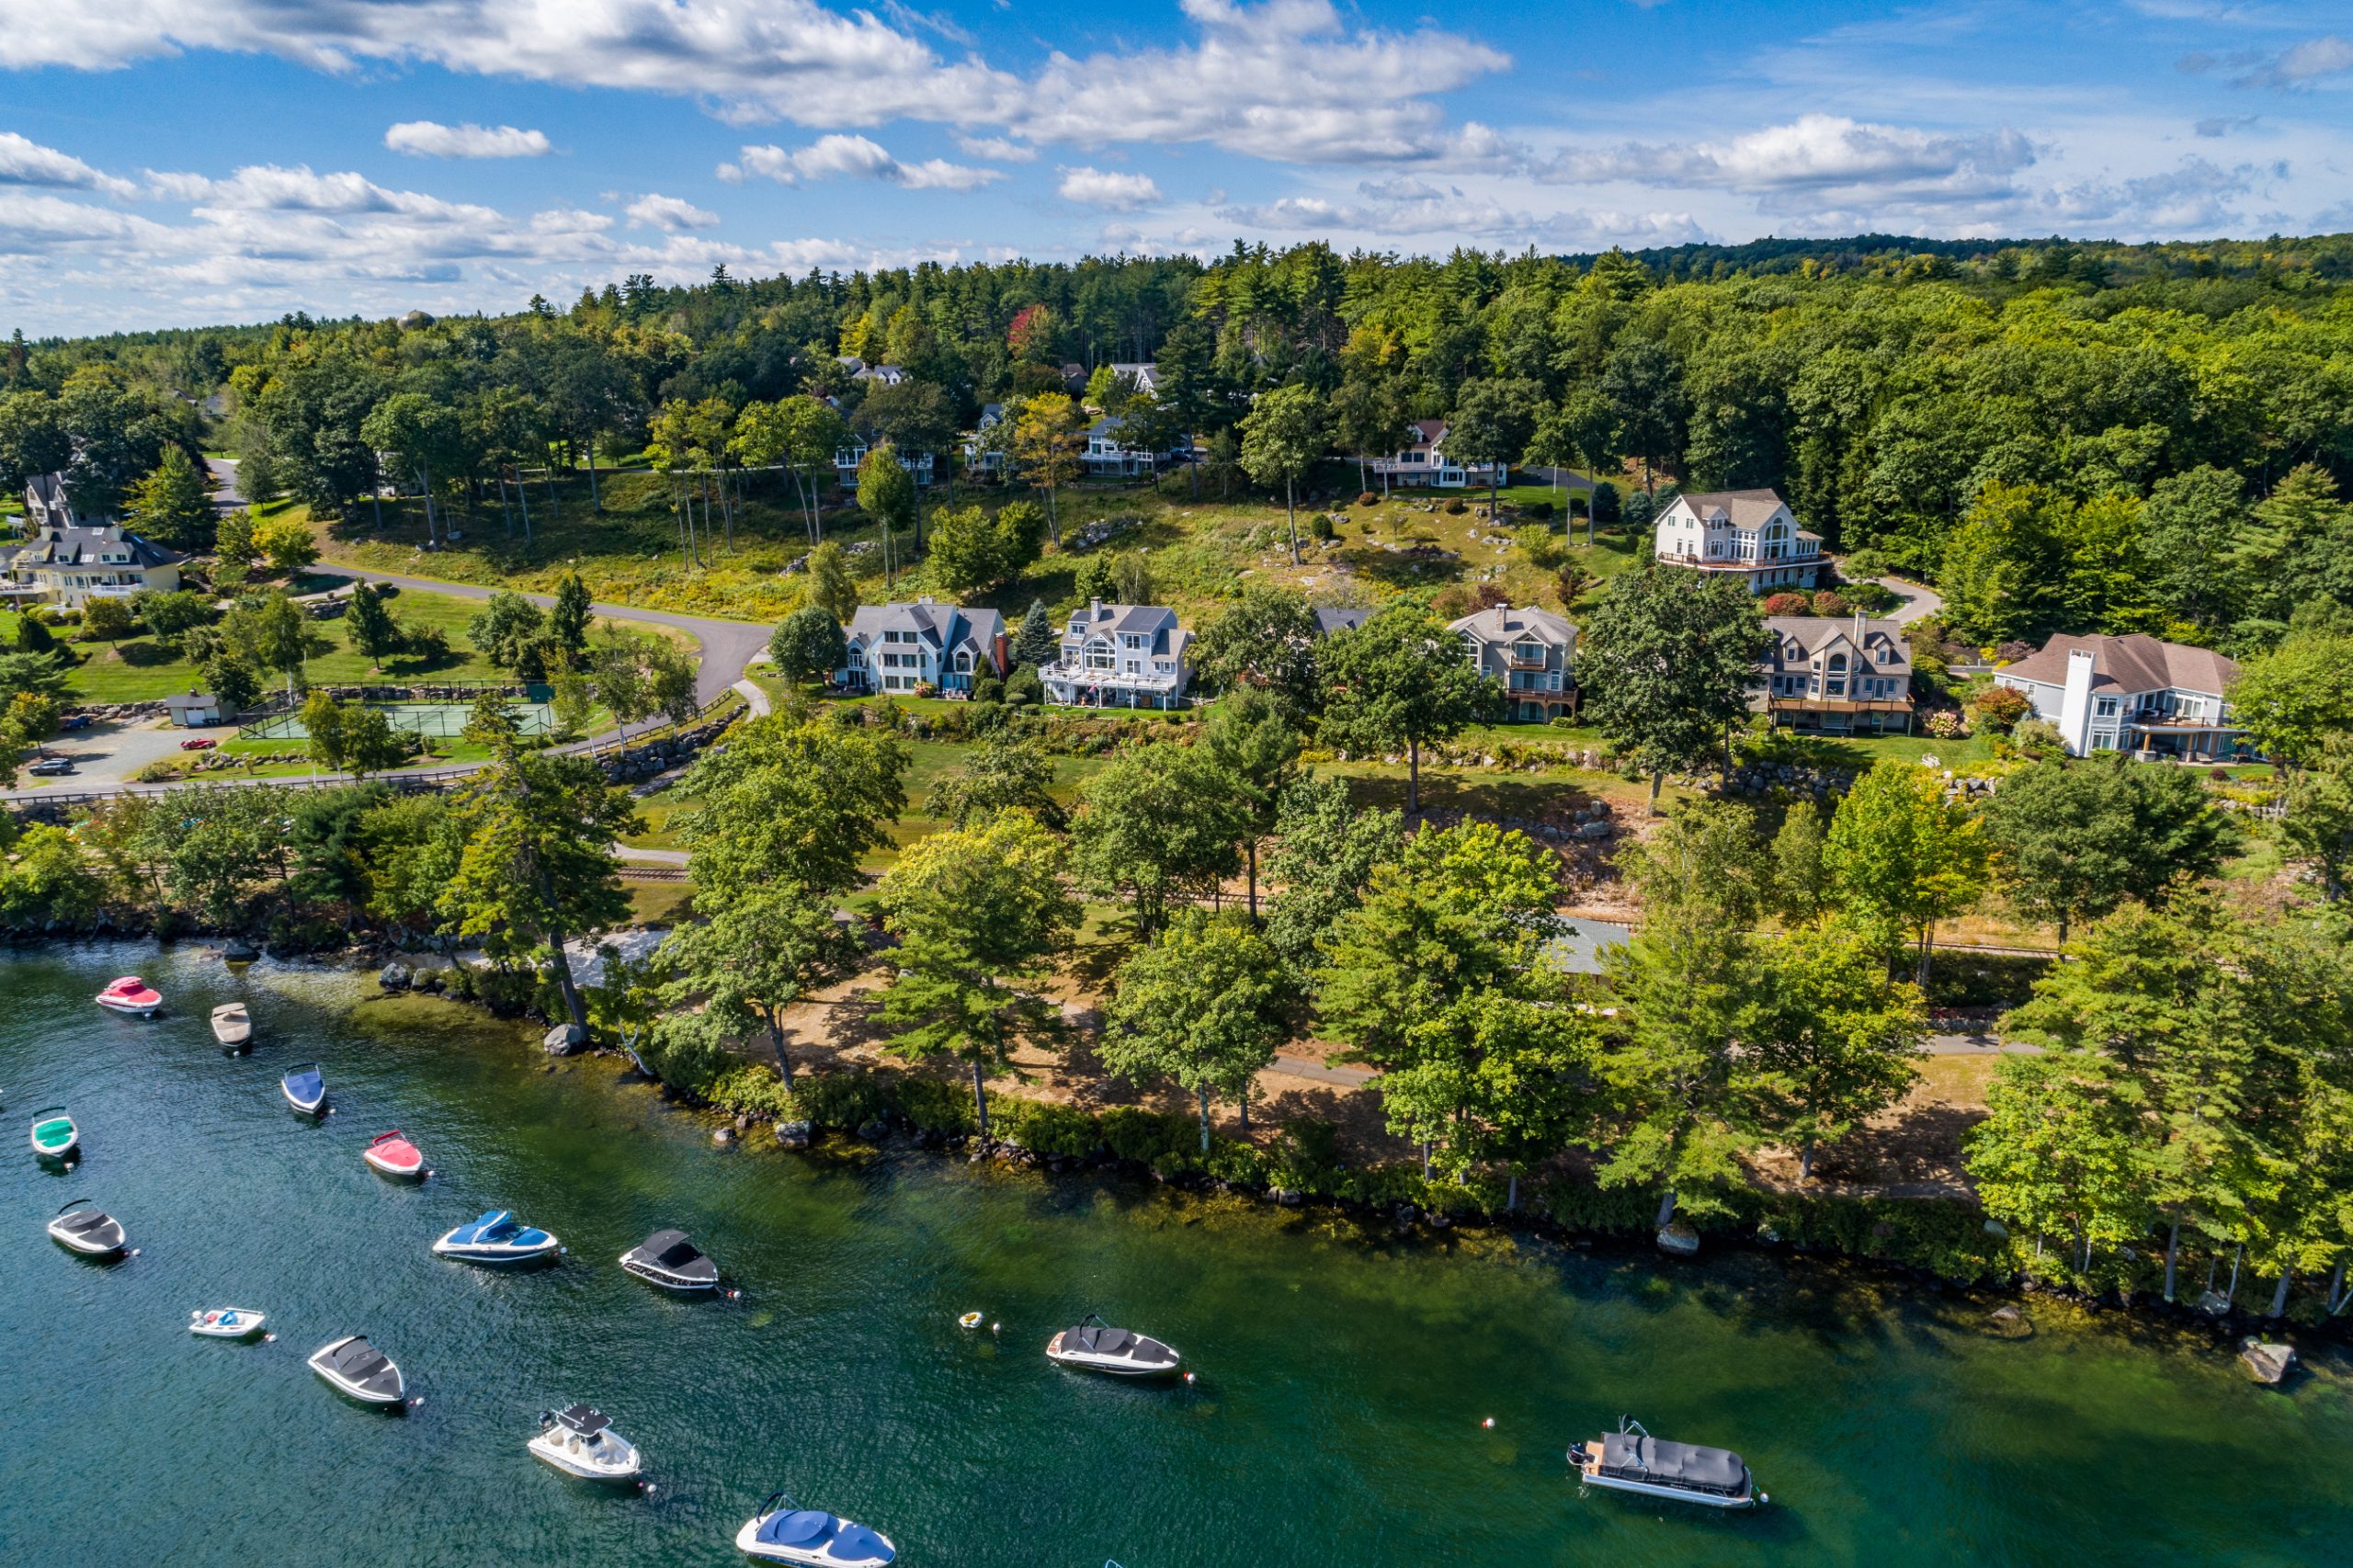 Only two homes for sale at South Down Shores and Long Bay on Lake Winnipesaukee pictured above